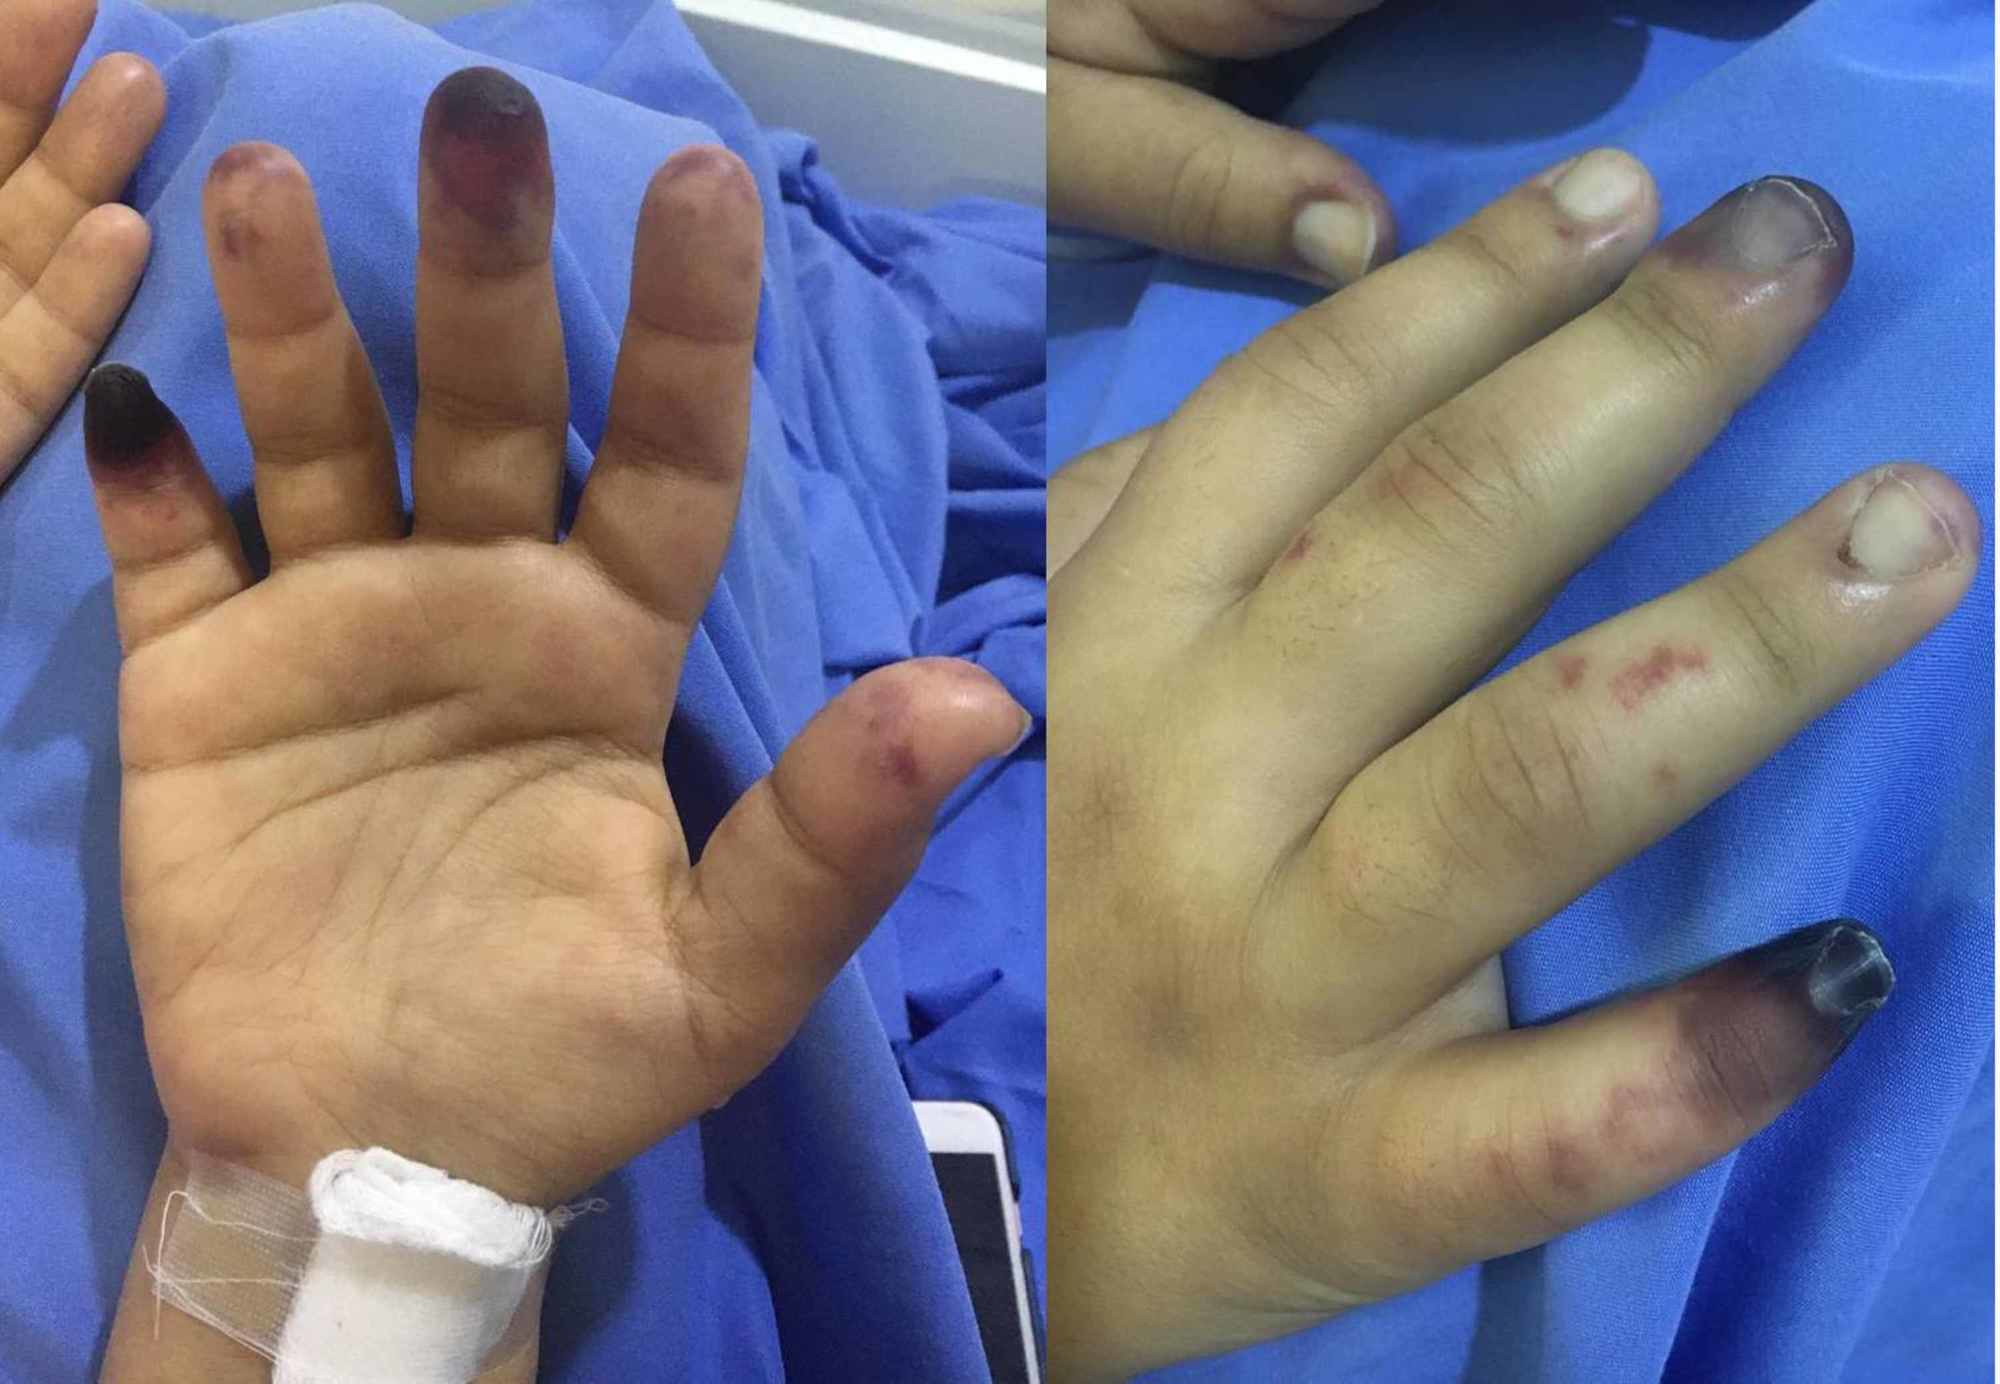 Cureus | Peripheral Gangrene as the Initial Presentation of Systemic